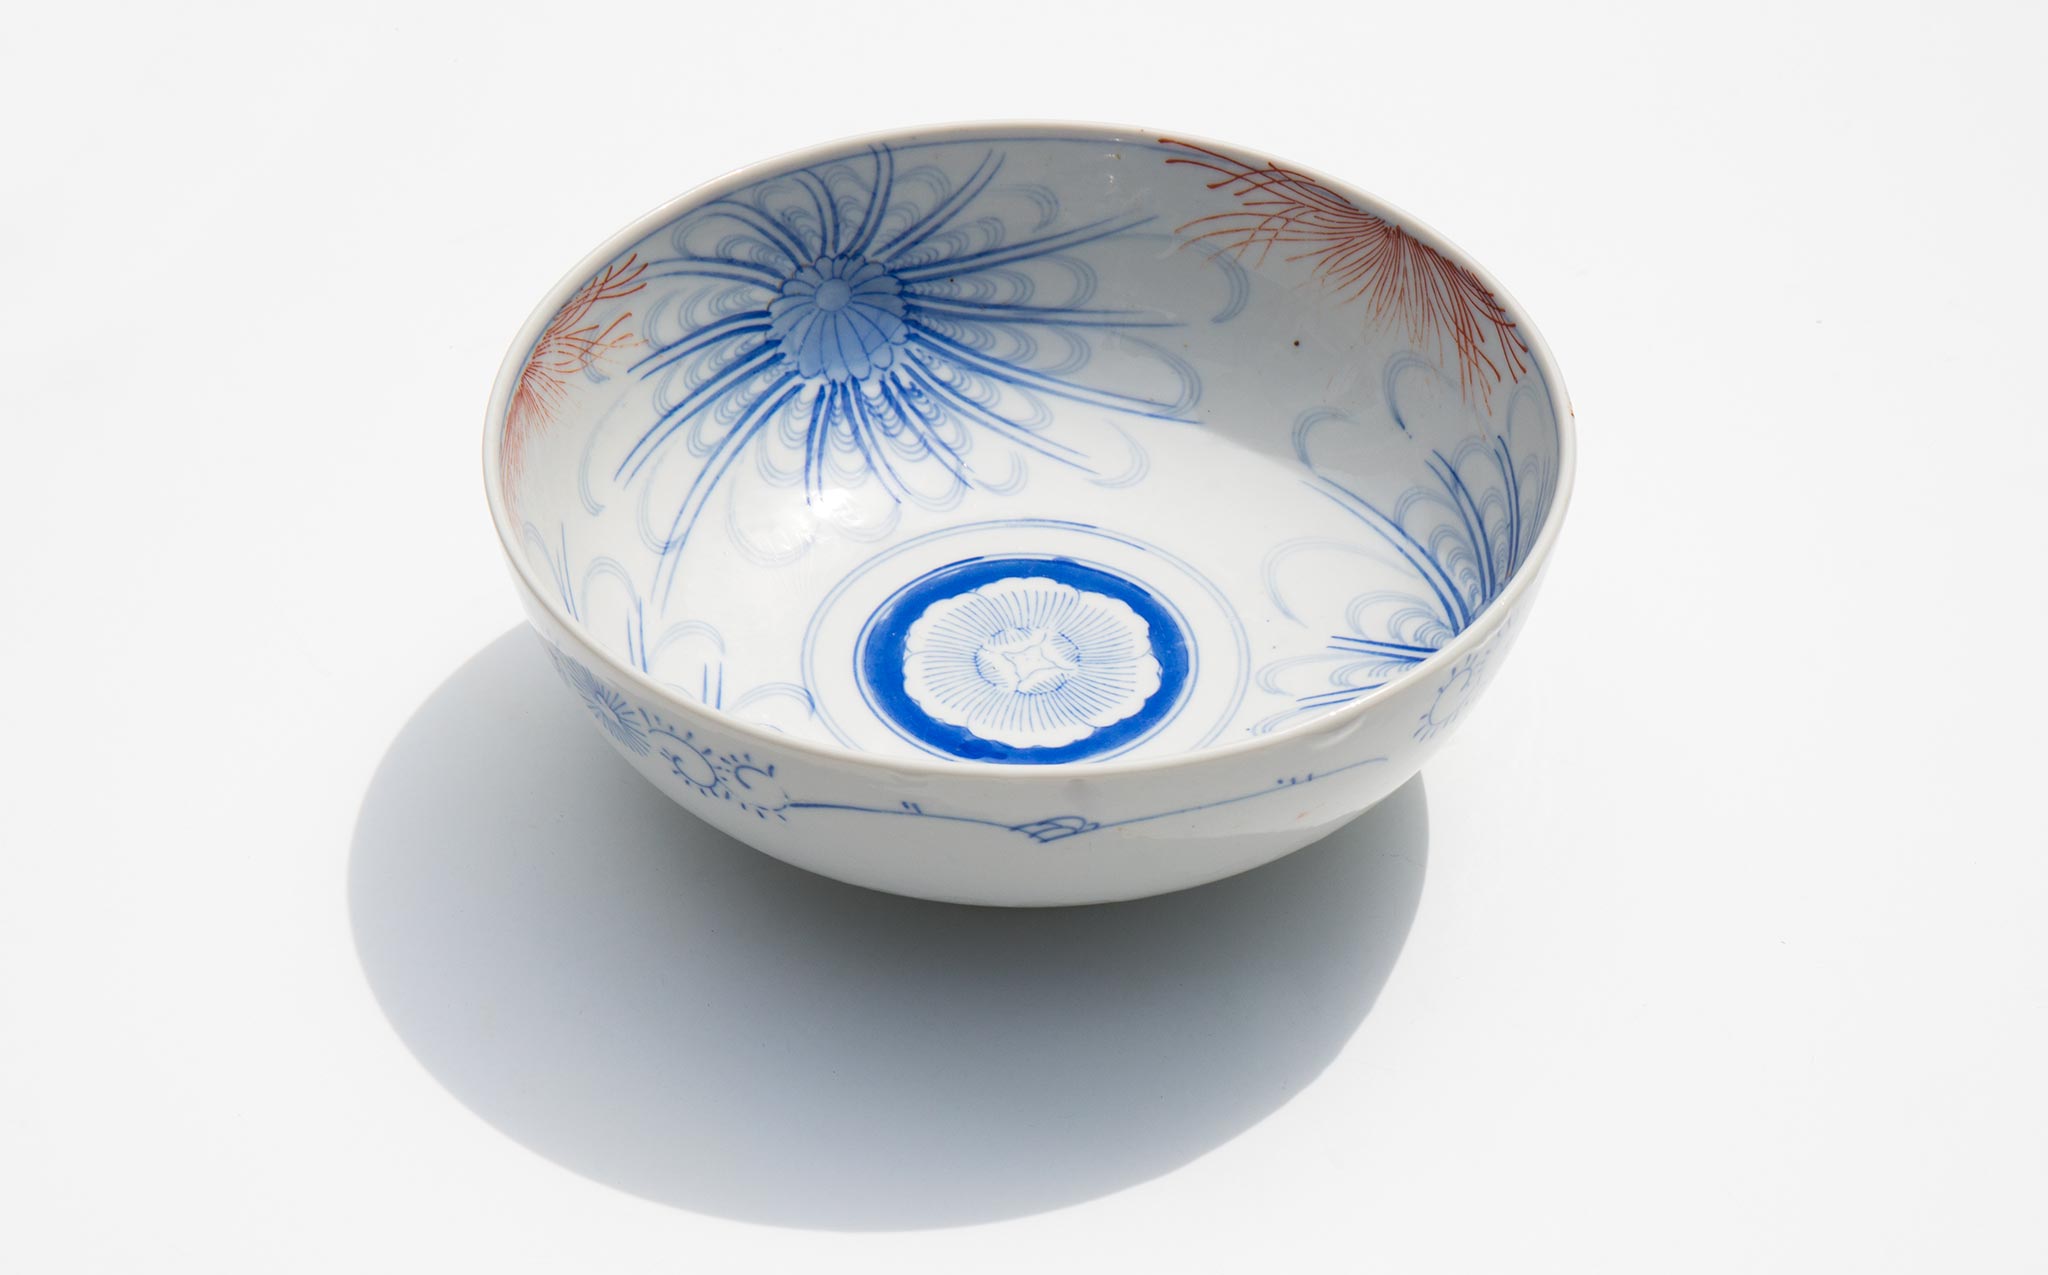 Hand painted Japanese Bowl